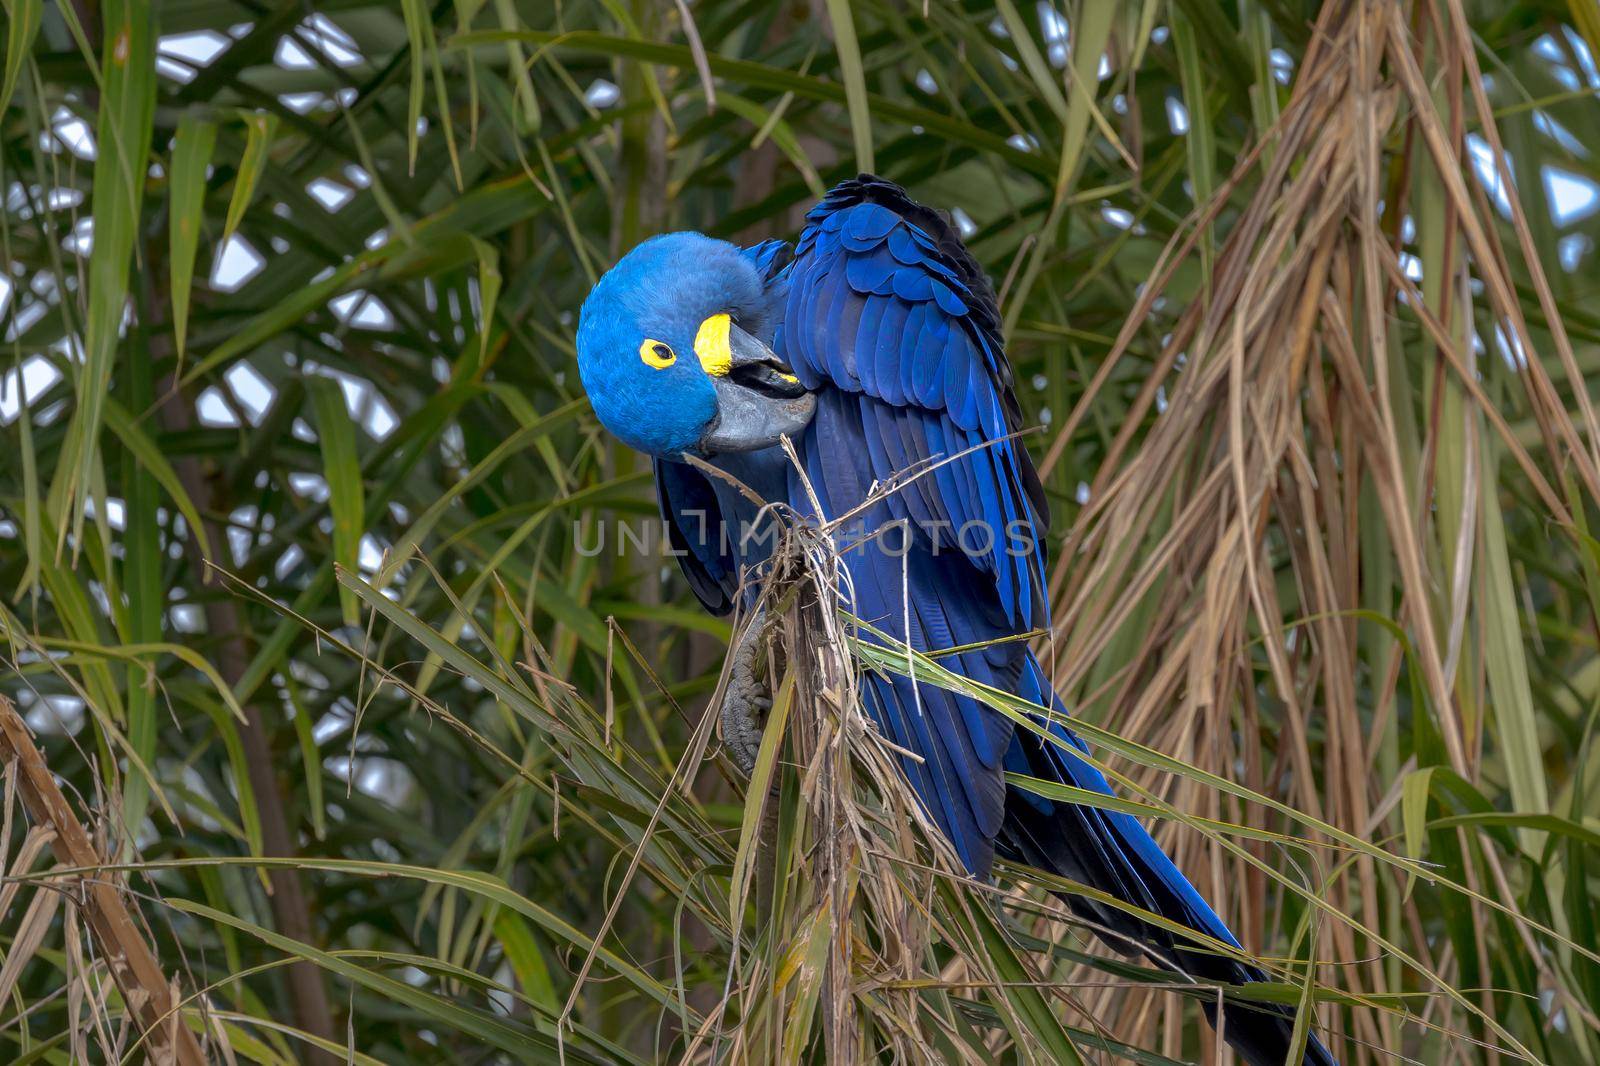 A bright blue Hyacinth Macaw, Anodorhynchus hyacinthinus, preening its feathers in a tree in the Pantanal of Brazil.